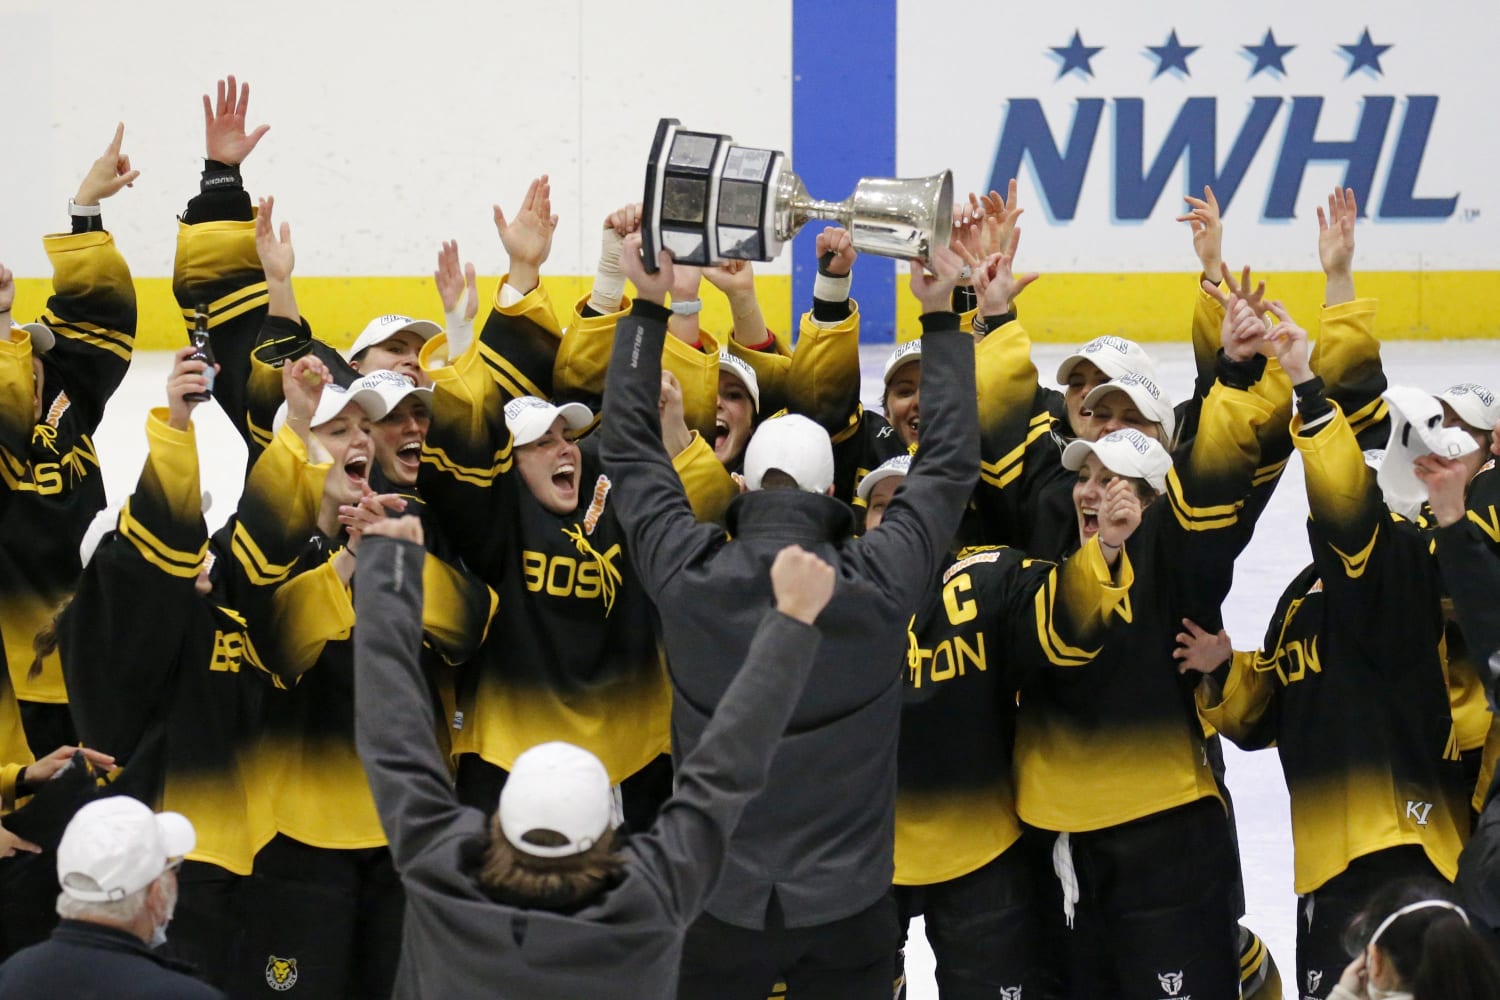 NWHL doubles salary cap to $300K, delays Montreal expansion